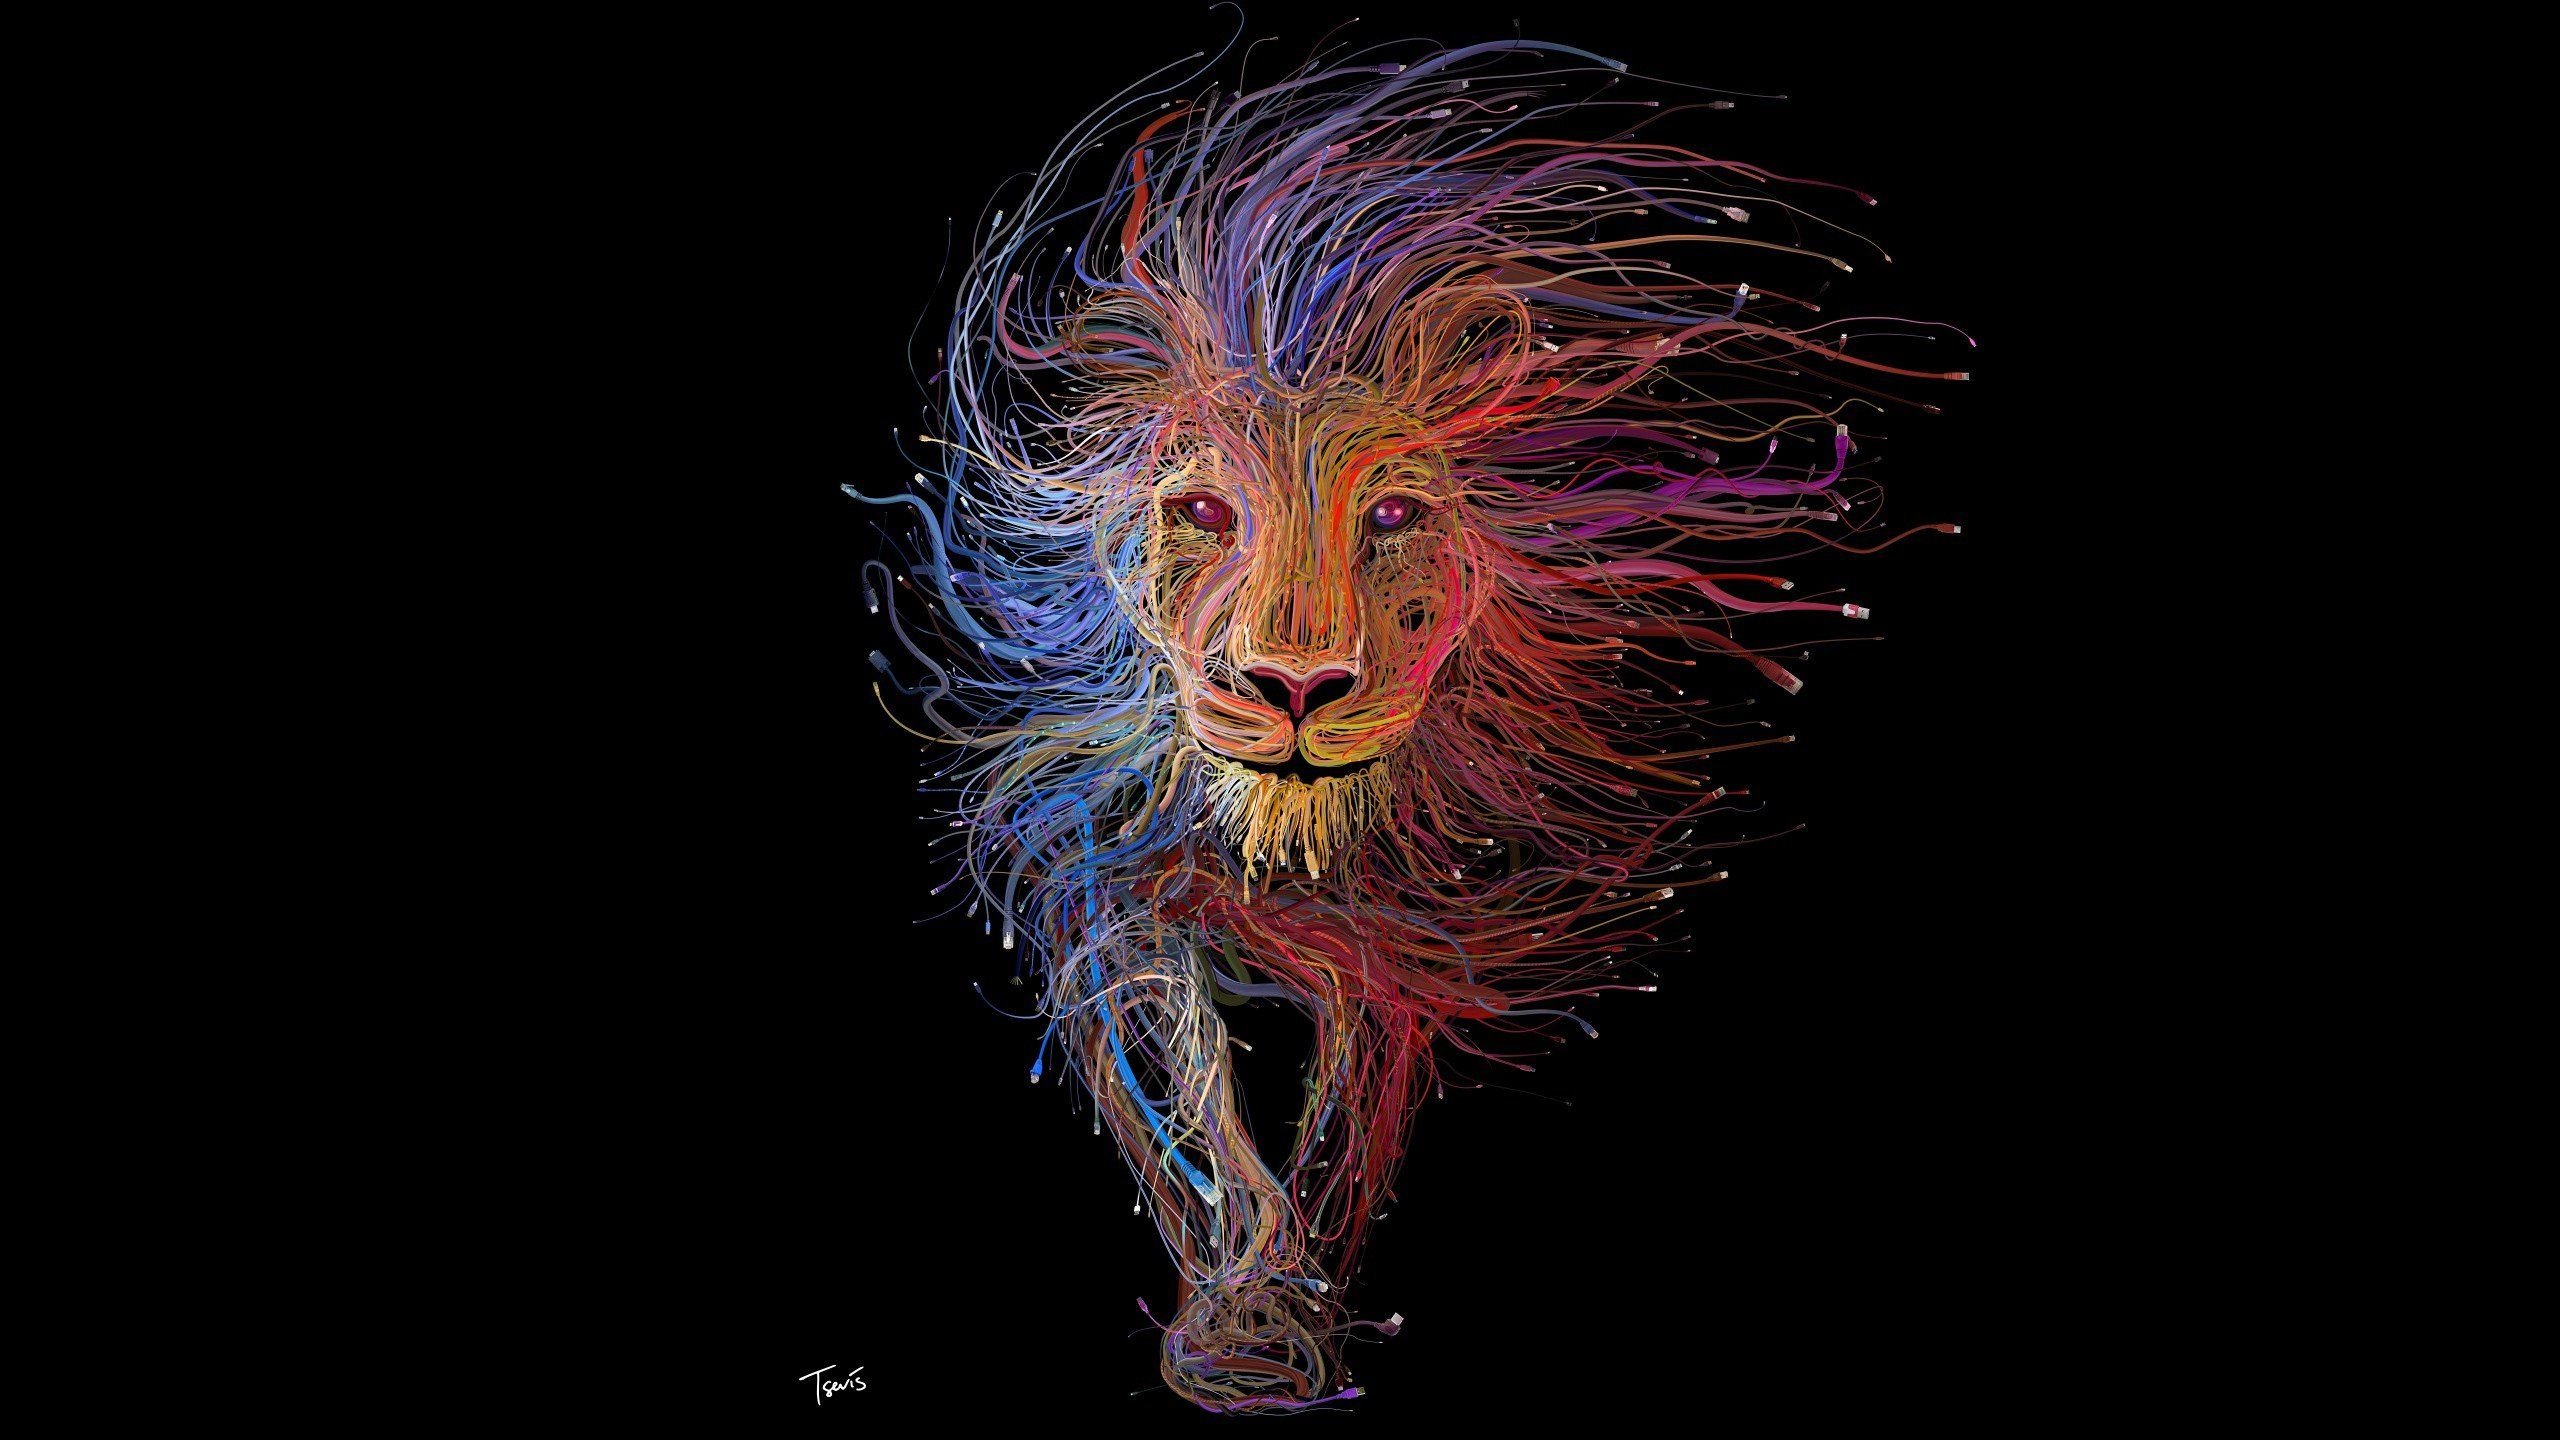 Lion 4K wallpaper for your desktop or mobile screen free and easy